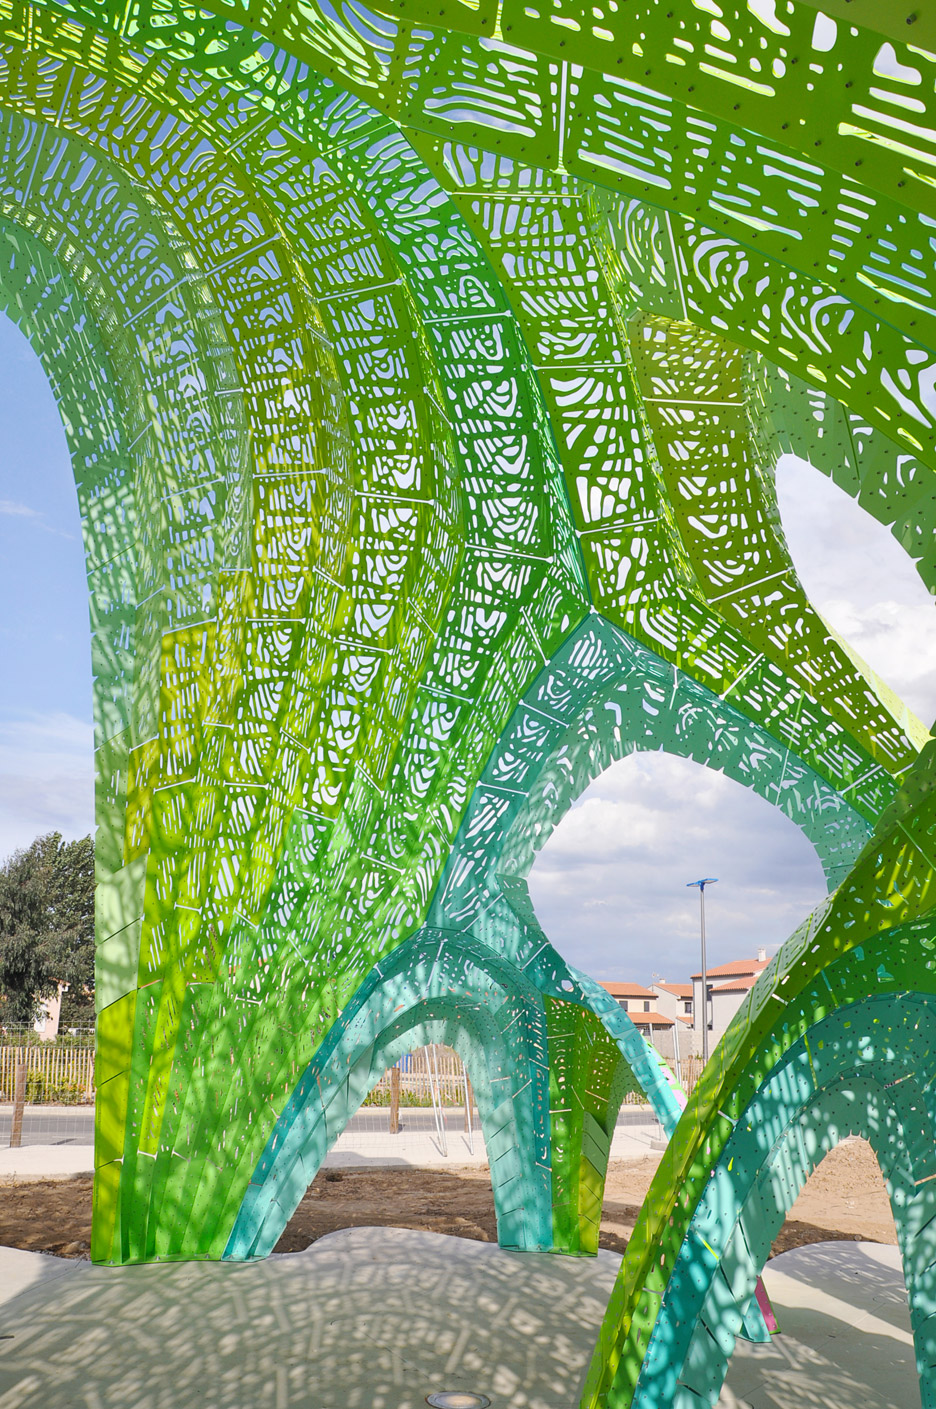 Pleated Inflation by Marc Fornes in Argeles, France